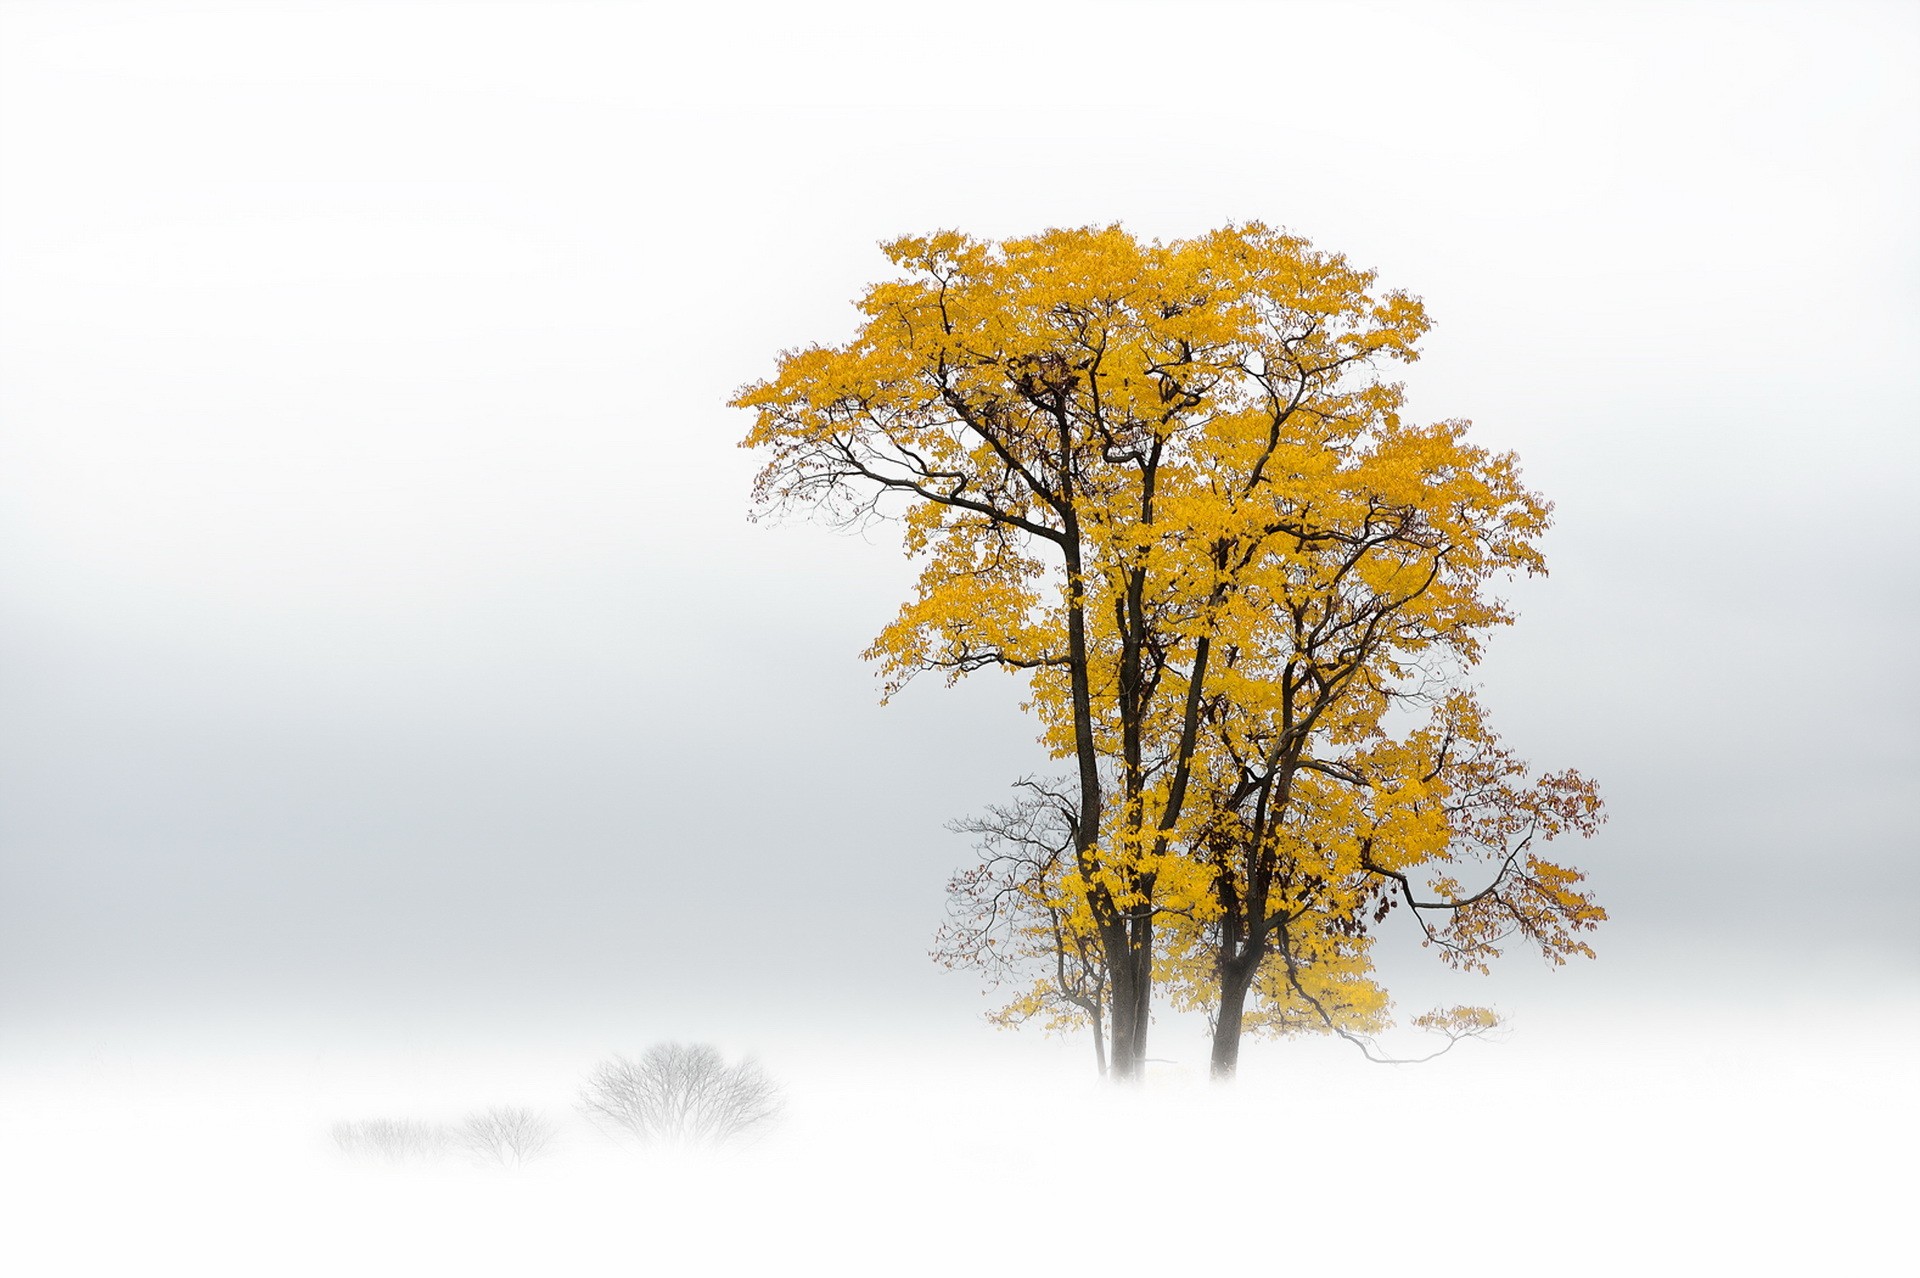 General 1920x1278 plants trees snow yellow mist white branch minimalism fall nature